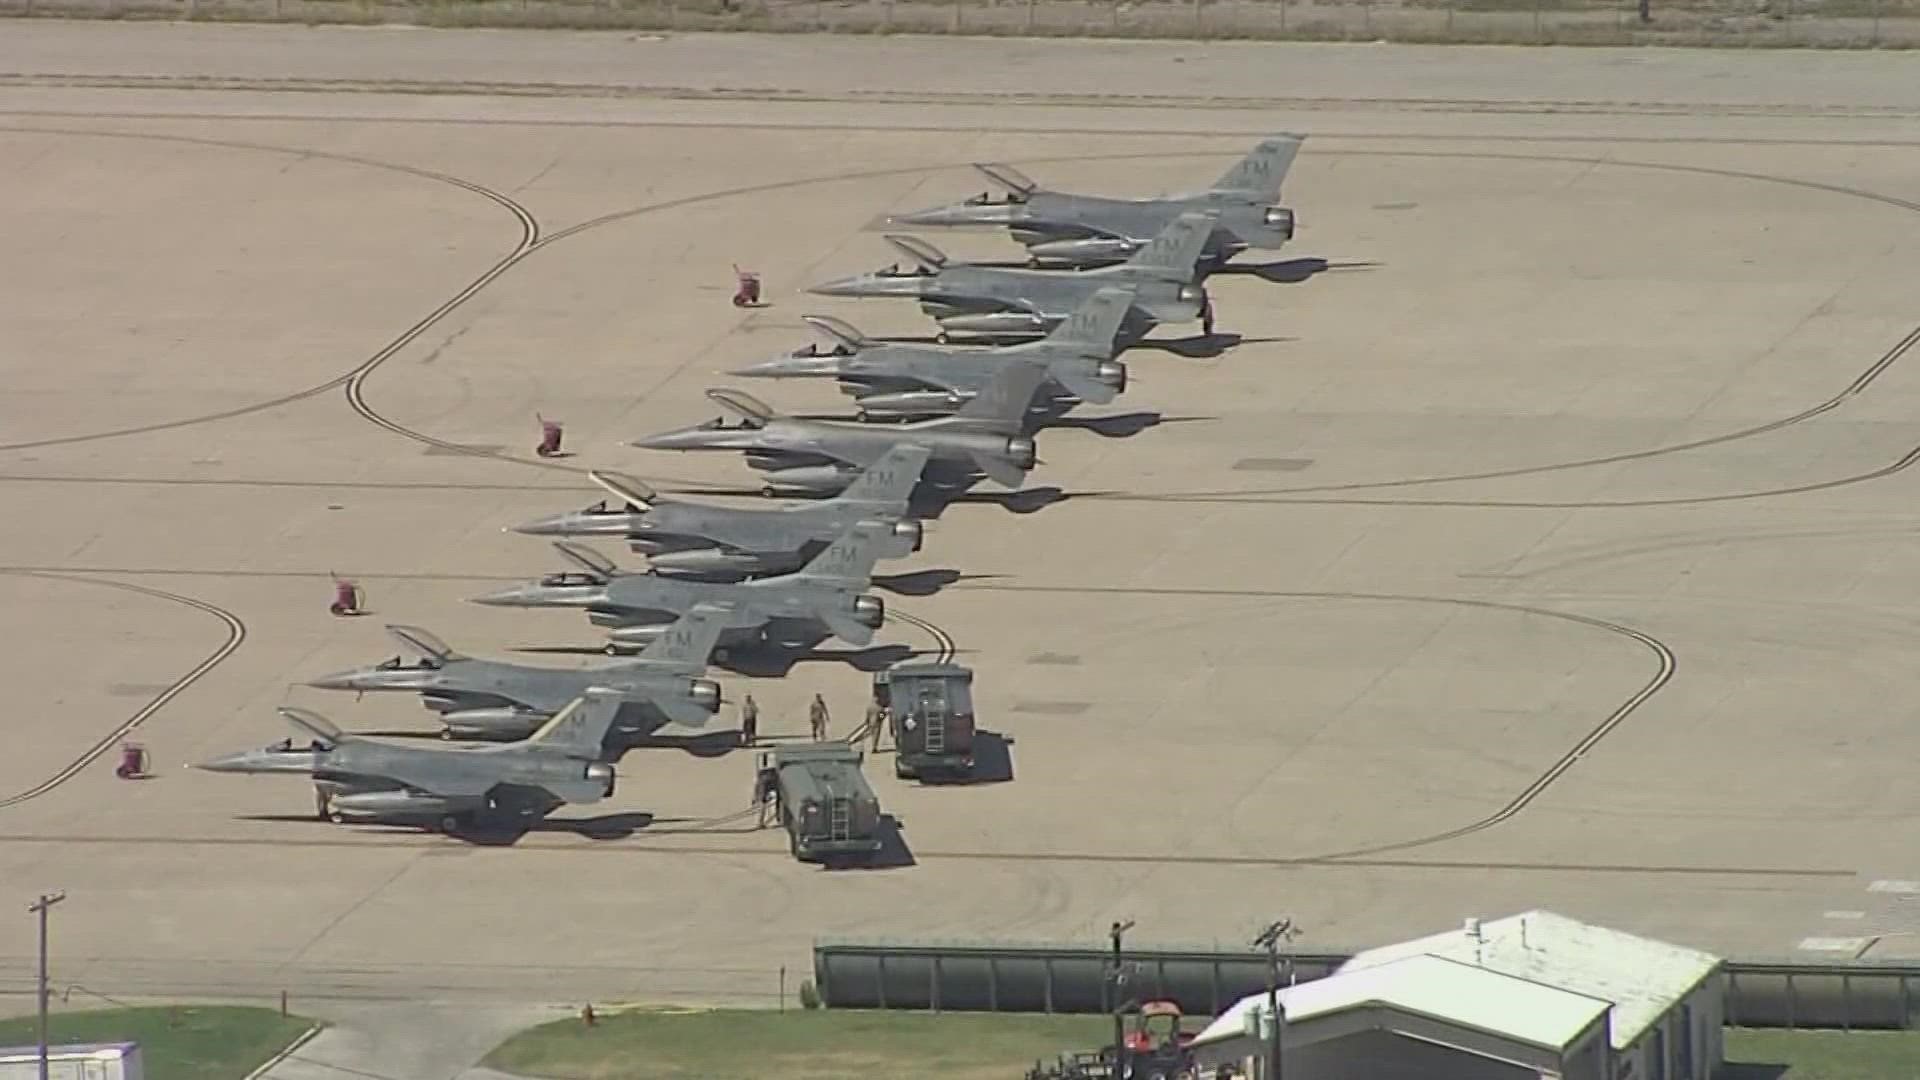 Air Force jets from Florida are being stored at the base in Fort worth until the hurricane passes.